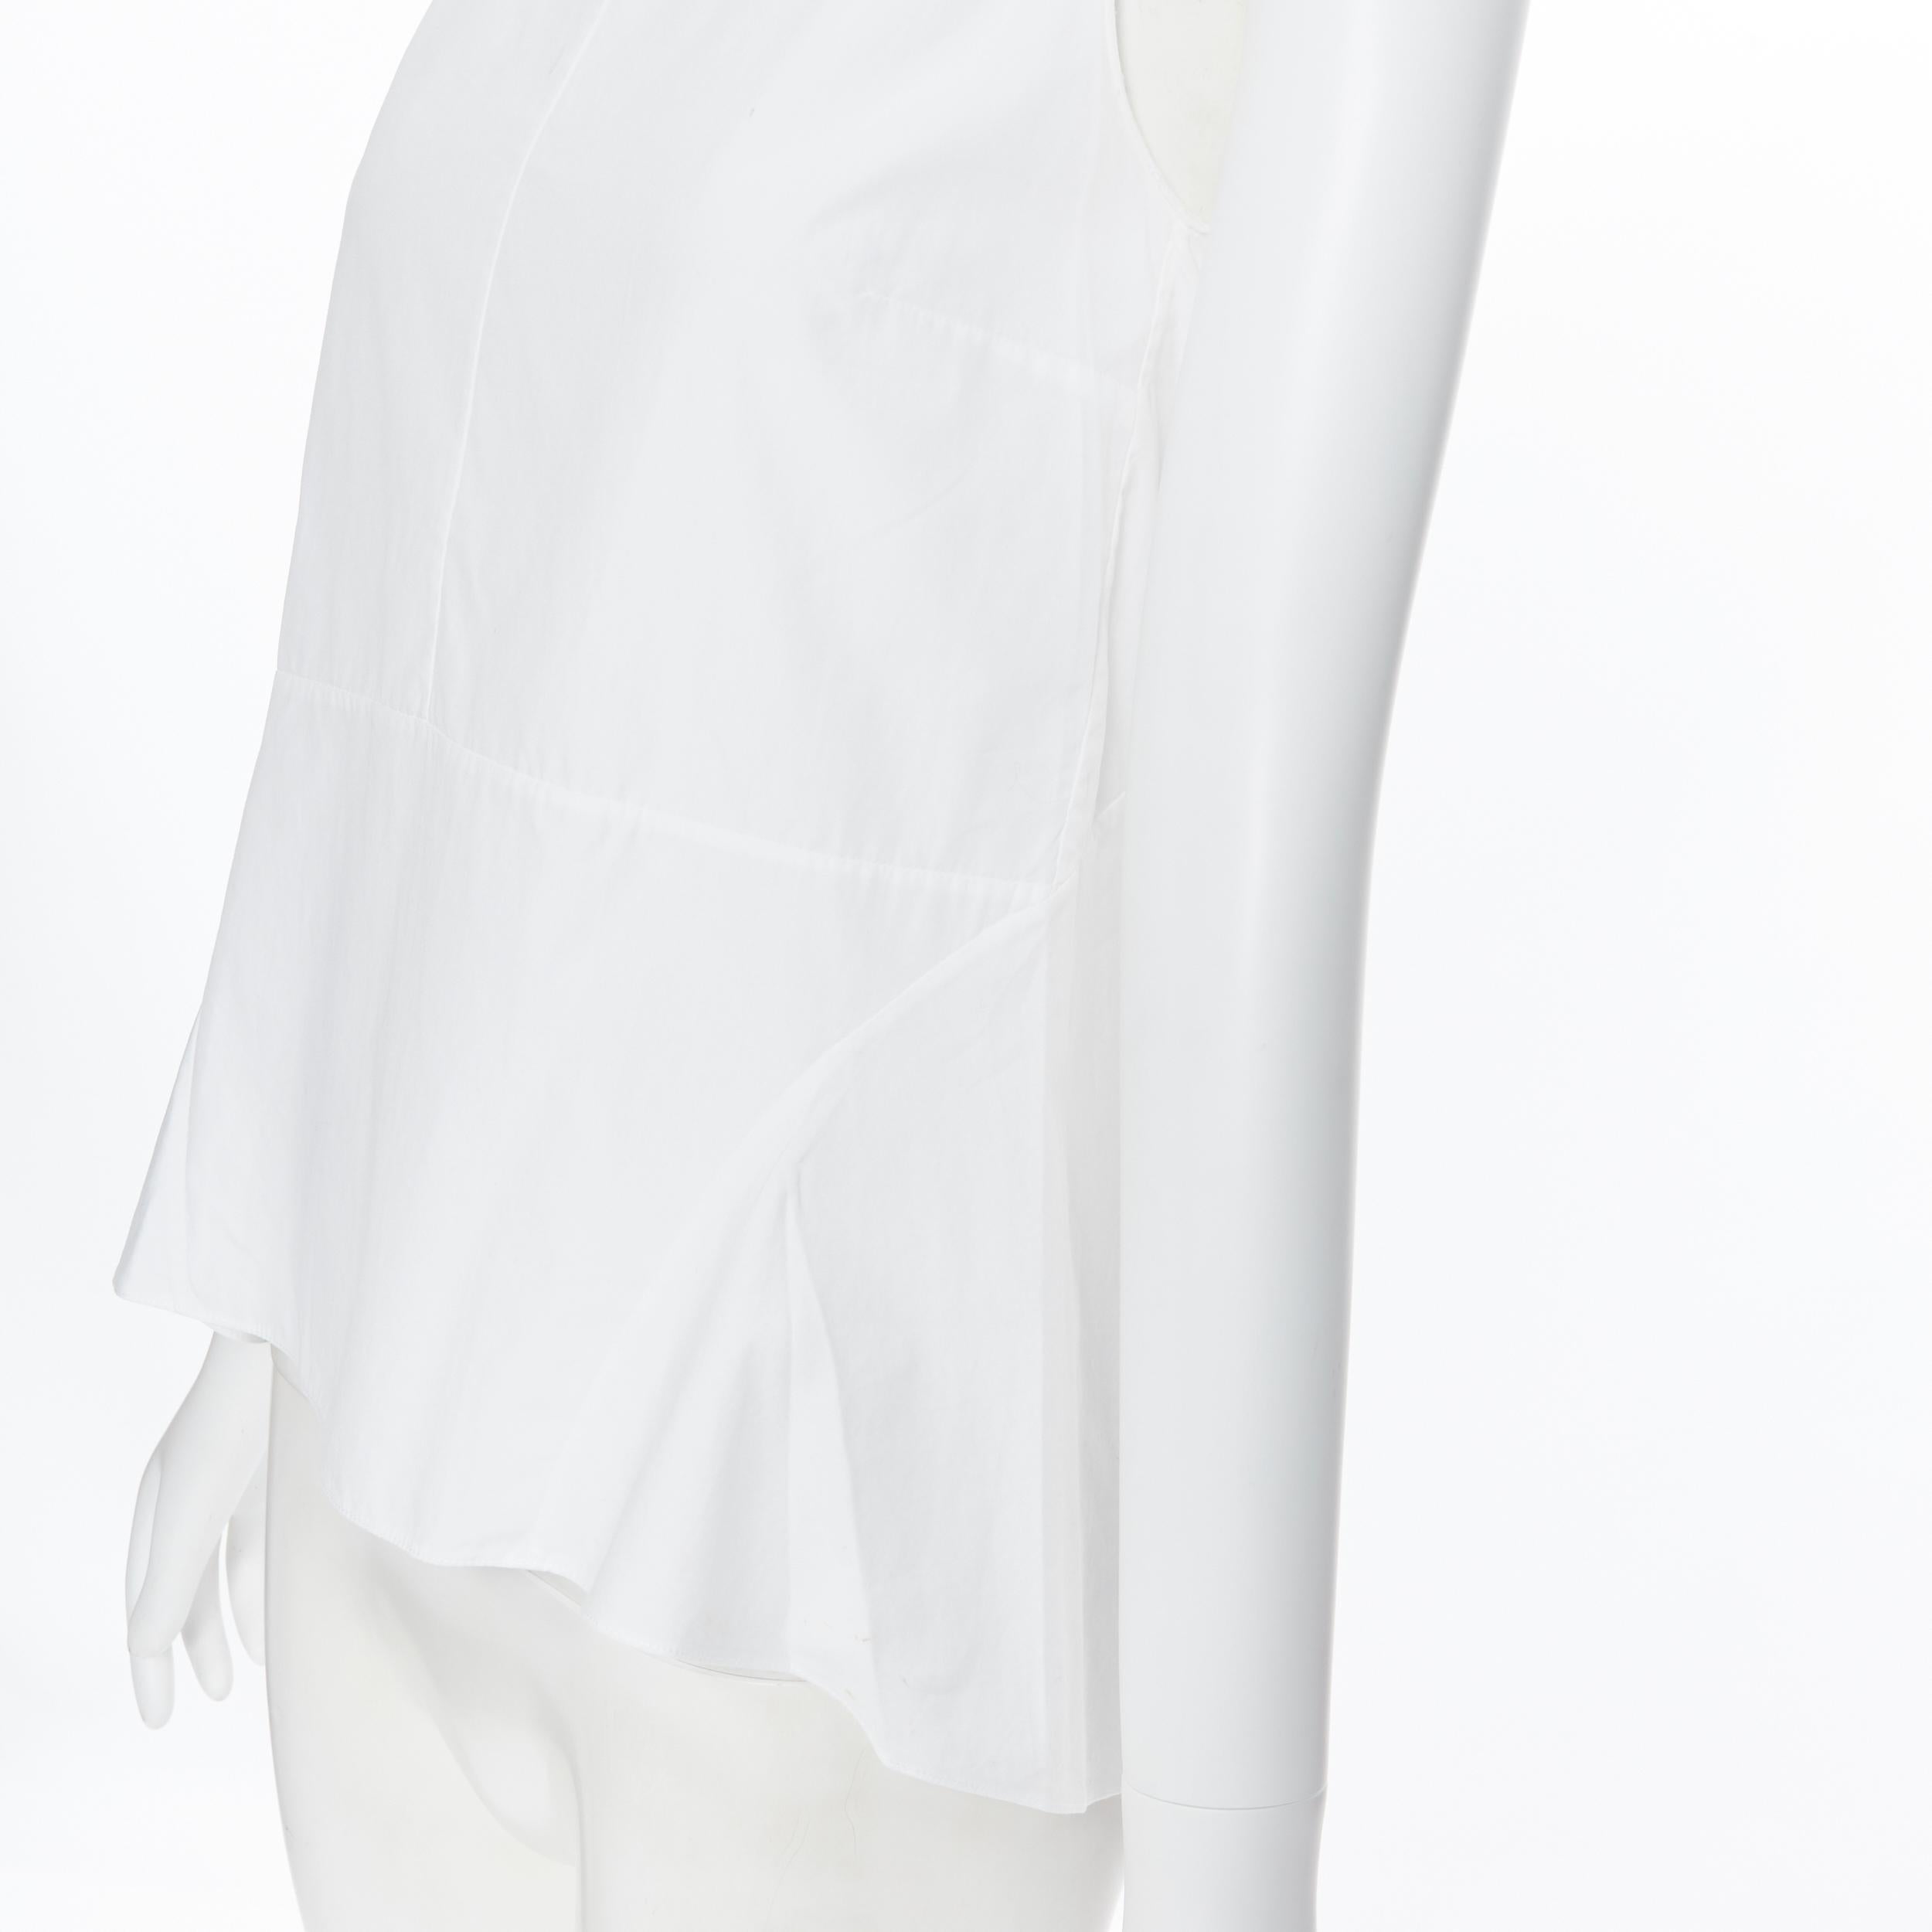 MARNI 100% cotton white curved seam flared hem sleeveless top IT38 XS
Brand: Marni
Model Name / Style: Cotton top
Material: Cotton
Color: White
Pattern: Solid
Closure: Zip
Extra Detail: Curved seams at front. High low flared hem. Sleeveless. Round